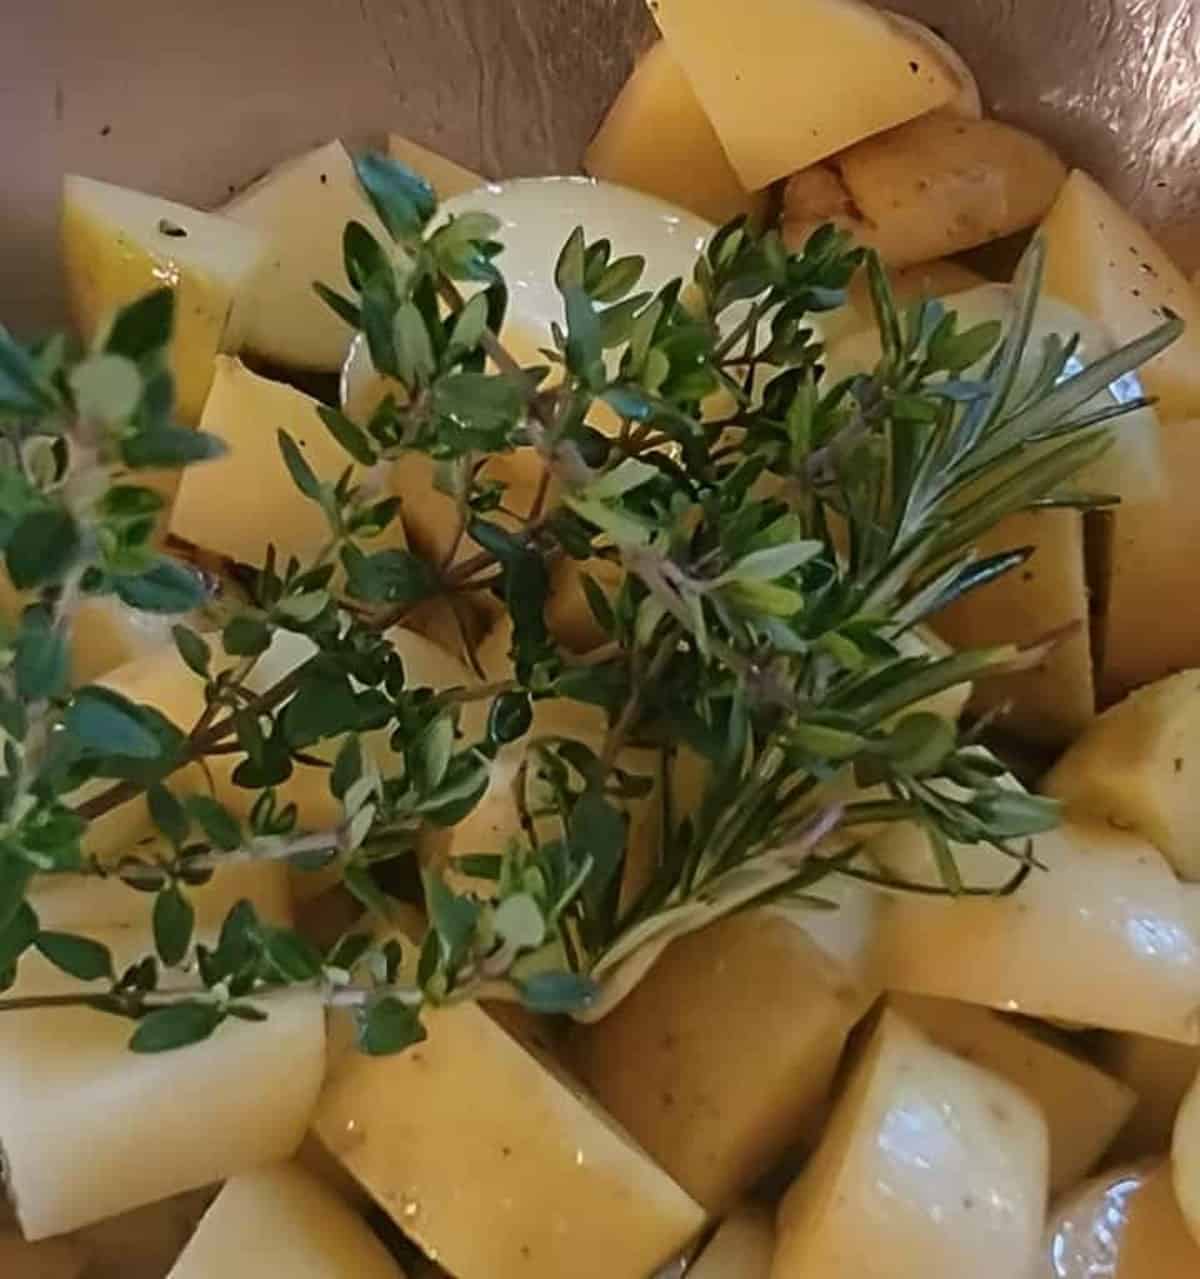 chopped potatoes, coated with oil and seasoned, with sprigs of fresh thyme and rosemary, in mixing bowl